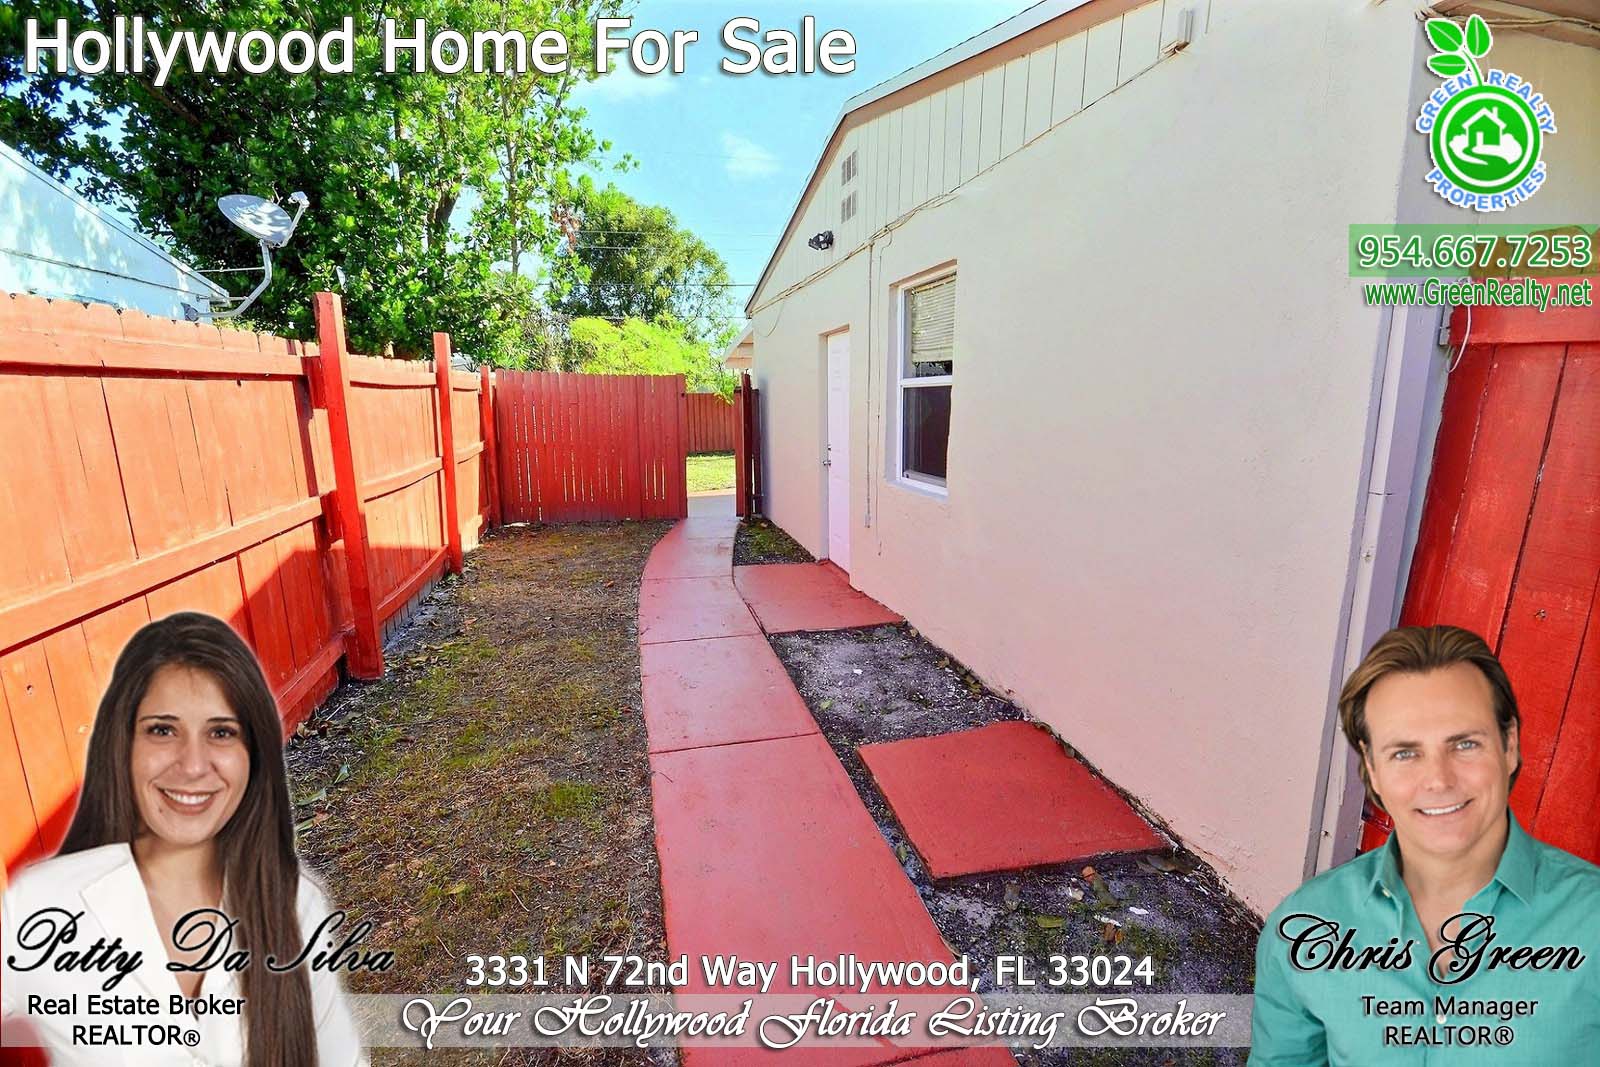 18 Homes For Sale in Hollywood Florida (4)